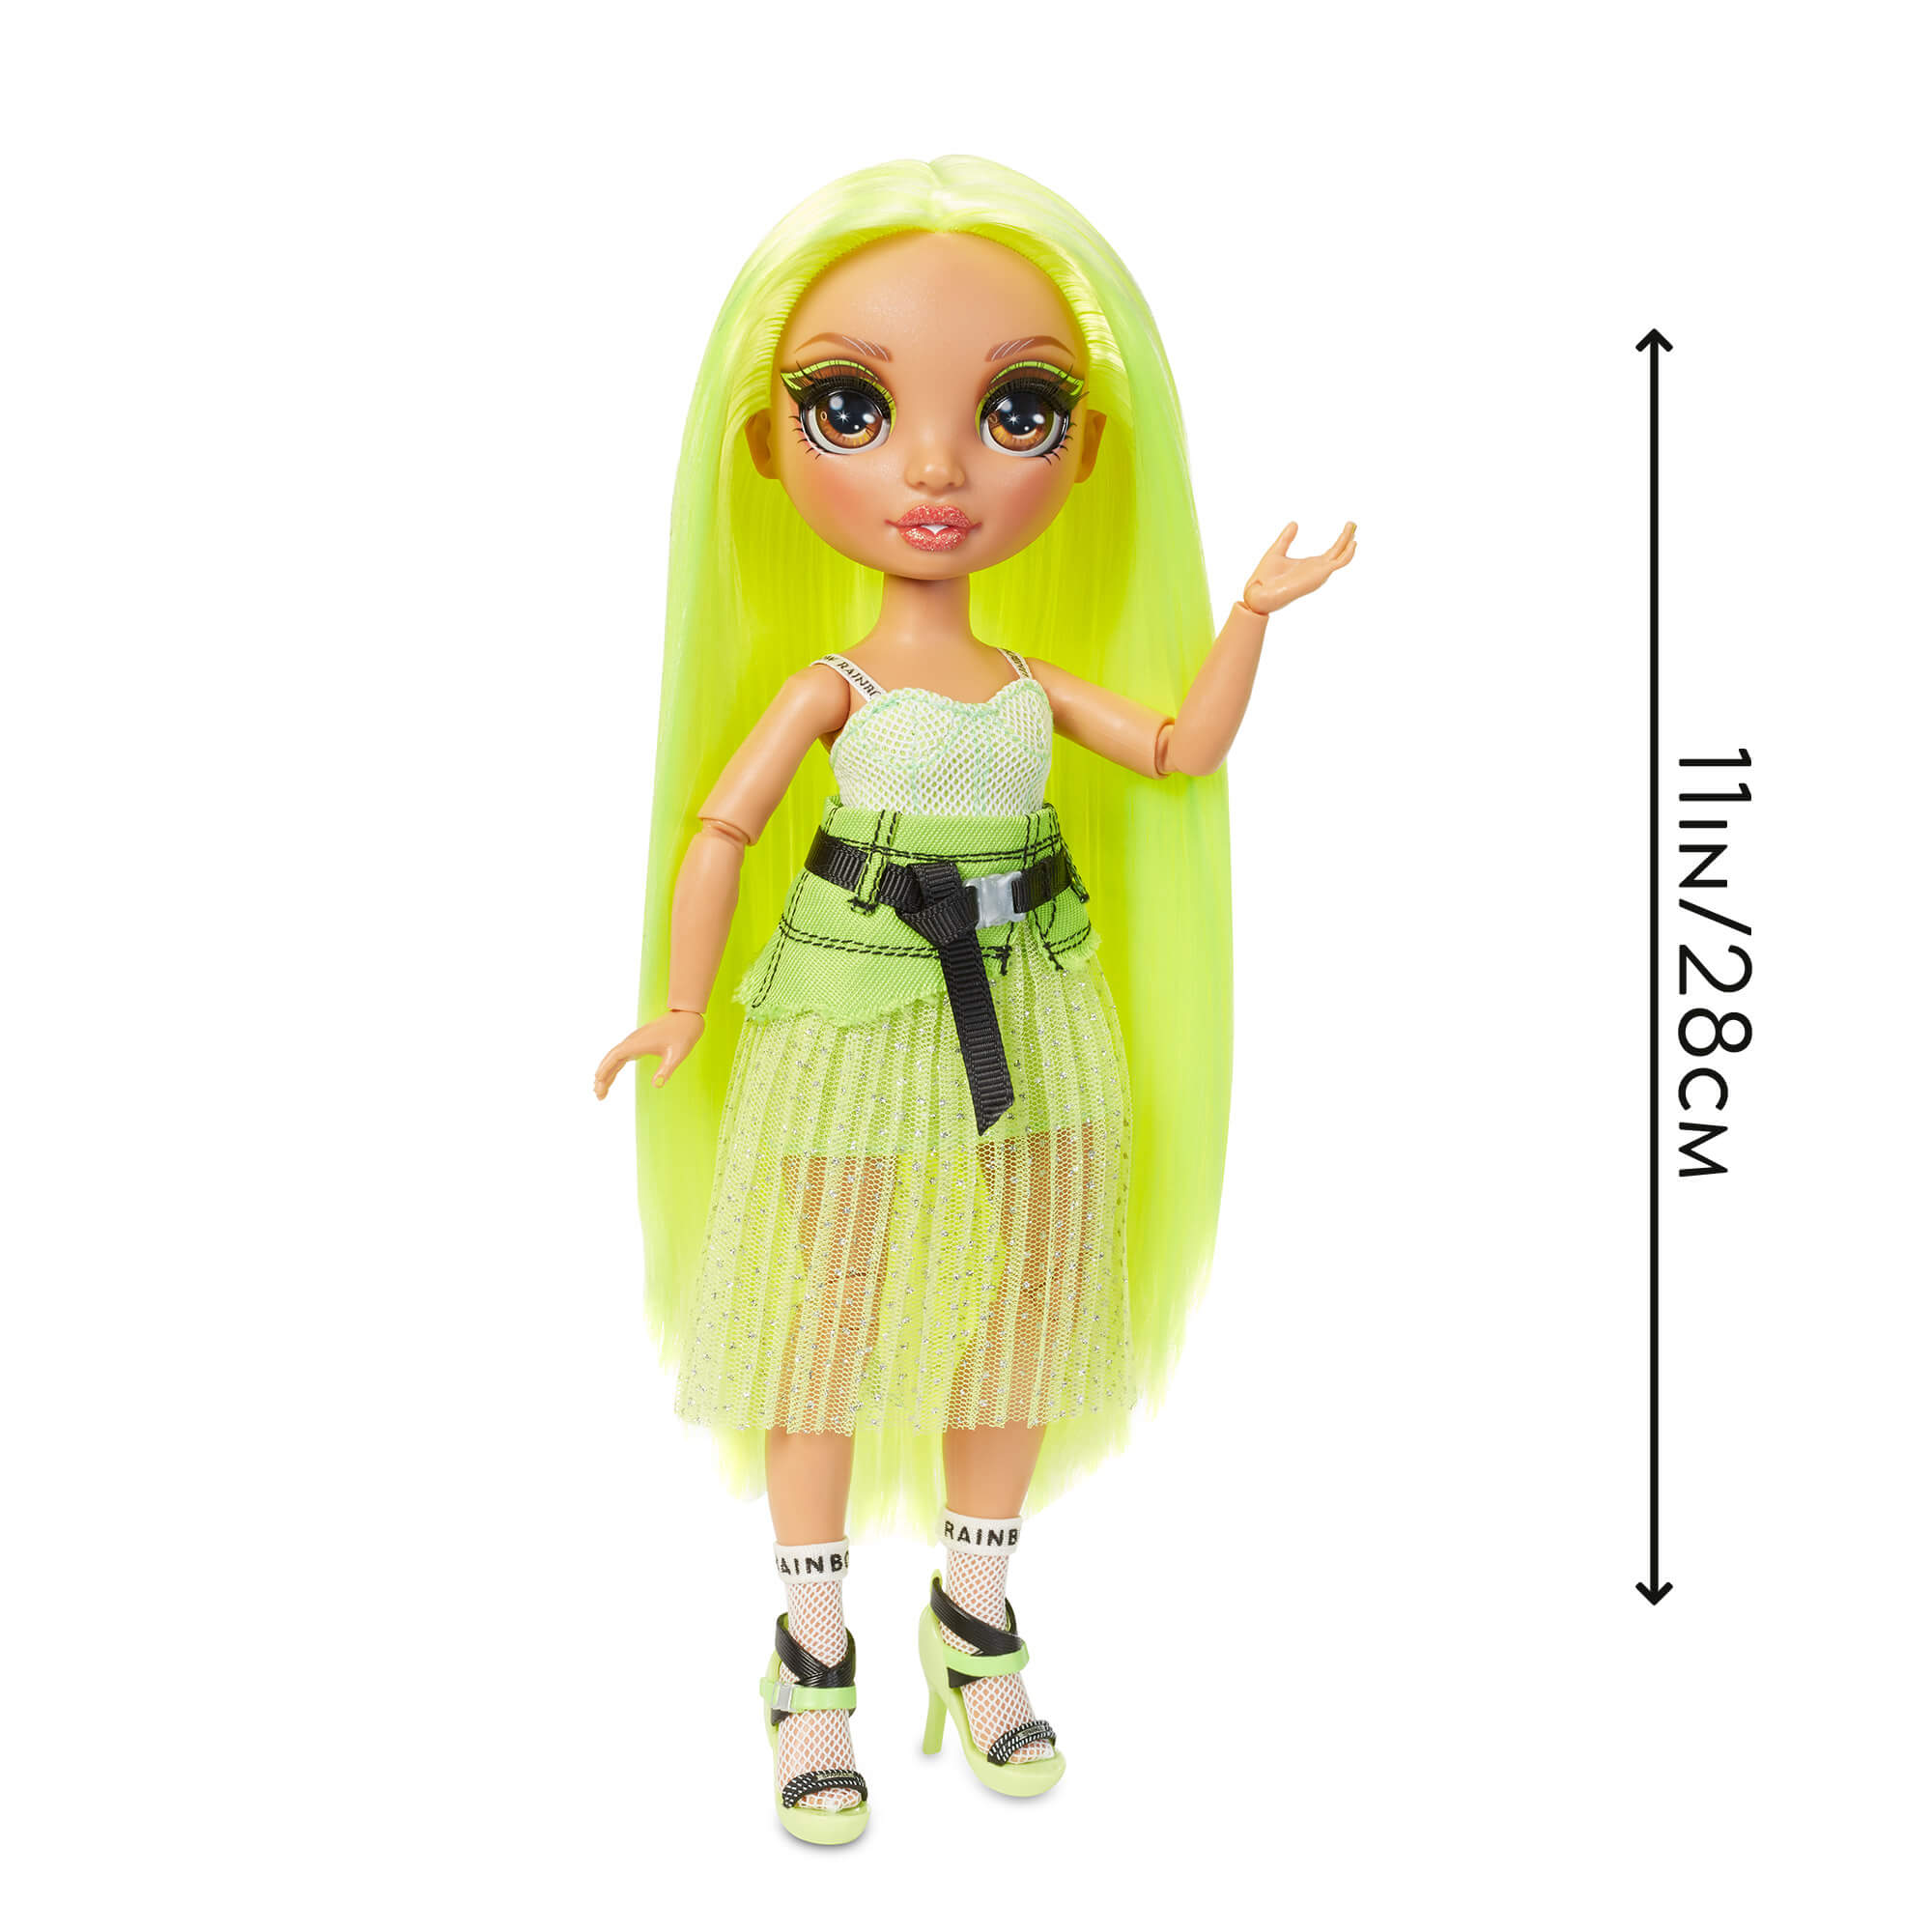 Rainbow High Karma Nichols – Neon Green Fashion Doll with 2 Complete Mix & Match Outfits and Accessories, Toys for Kids 6-12 Years Old - image 5 of 9